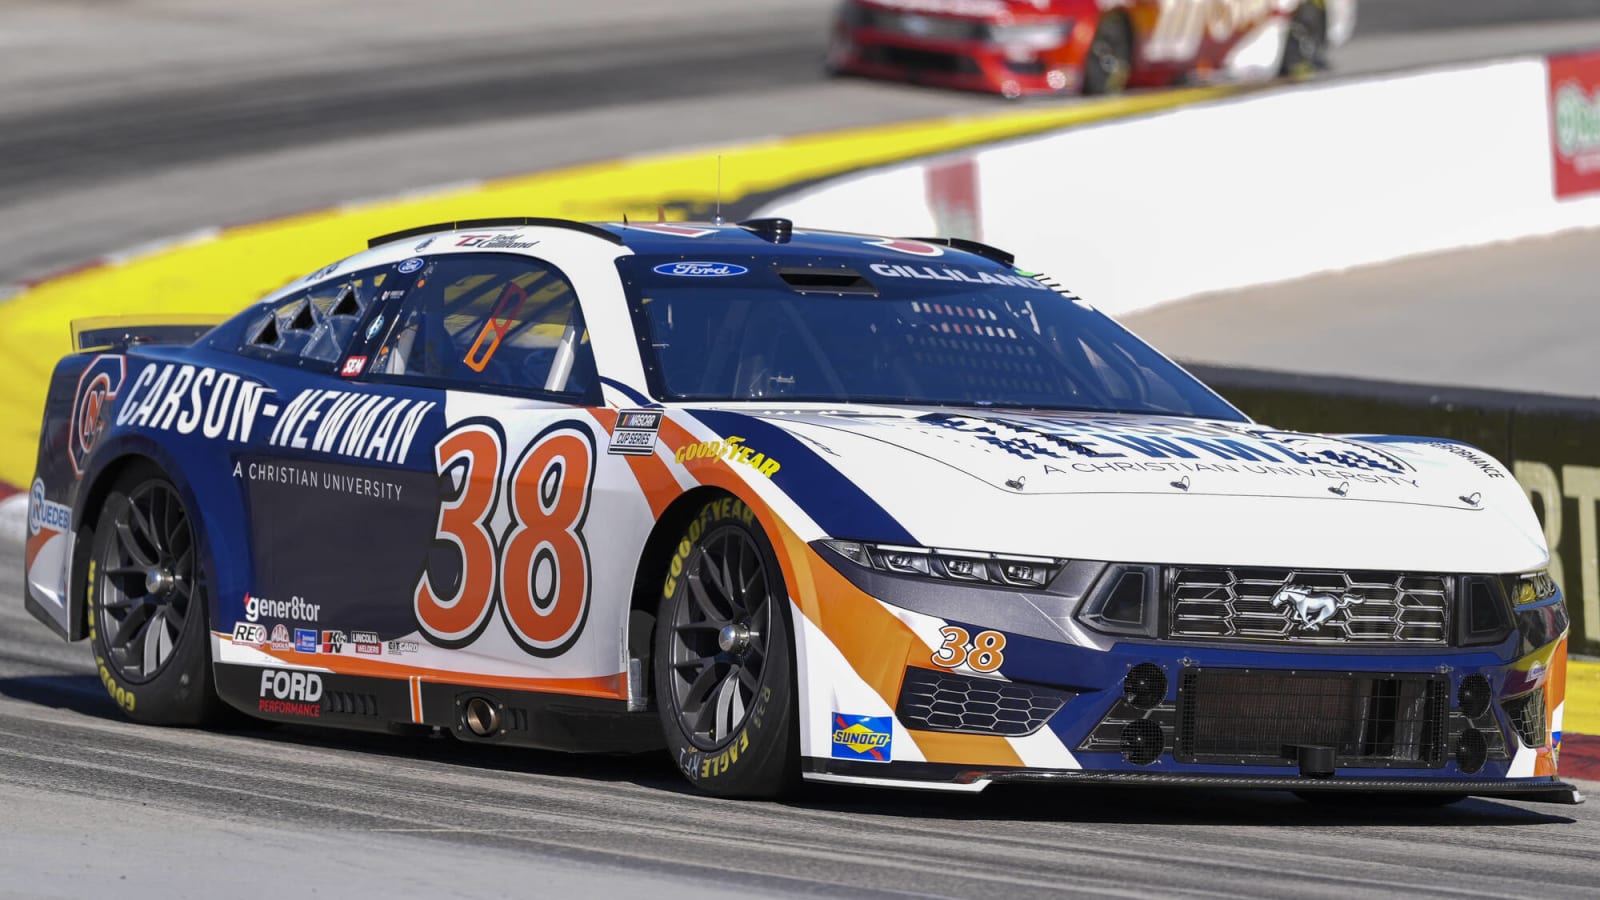 Todd Gilliland leaves pit road with wedge wrench still in car, serves penalty